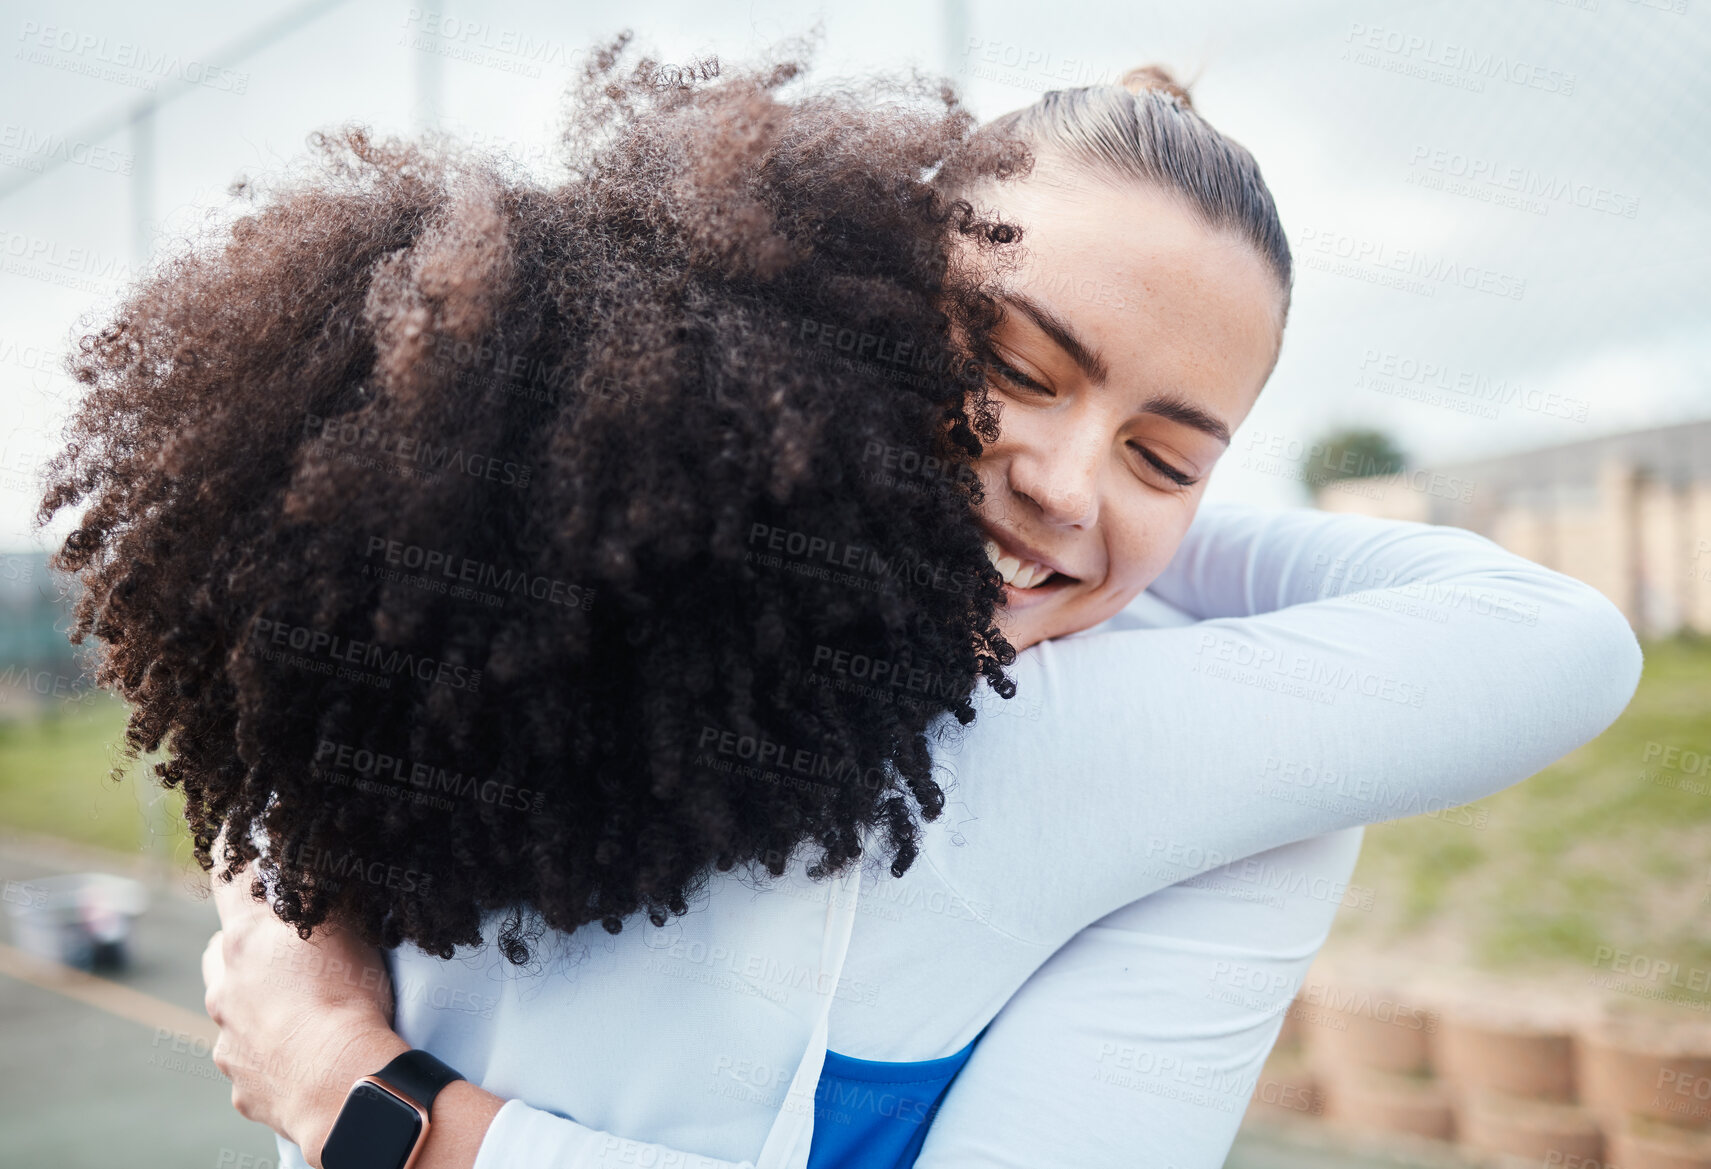 Buy stock photo Hug, success or team support in netball training game or match in goals celebration on sports court. Teamwork, fitness friends group or excited athlete girls with happy smile or winning together